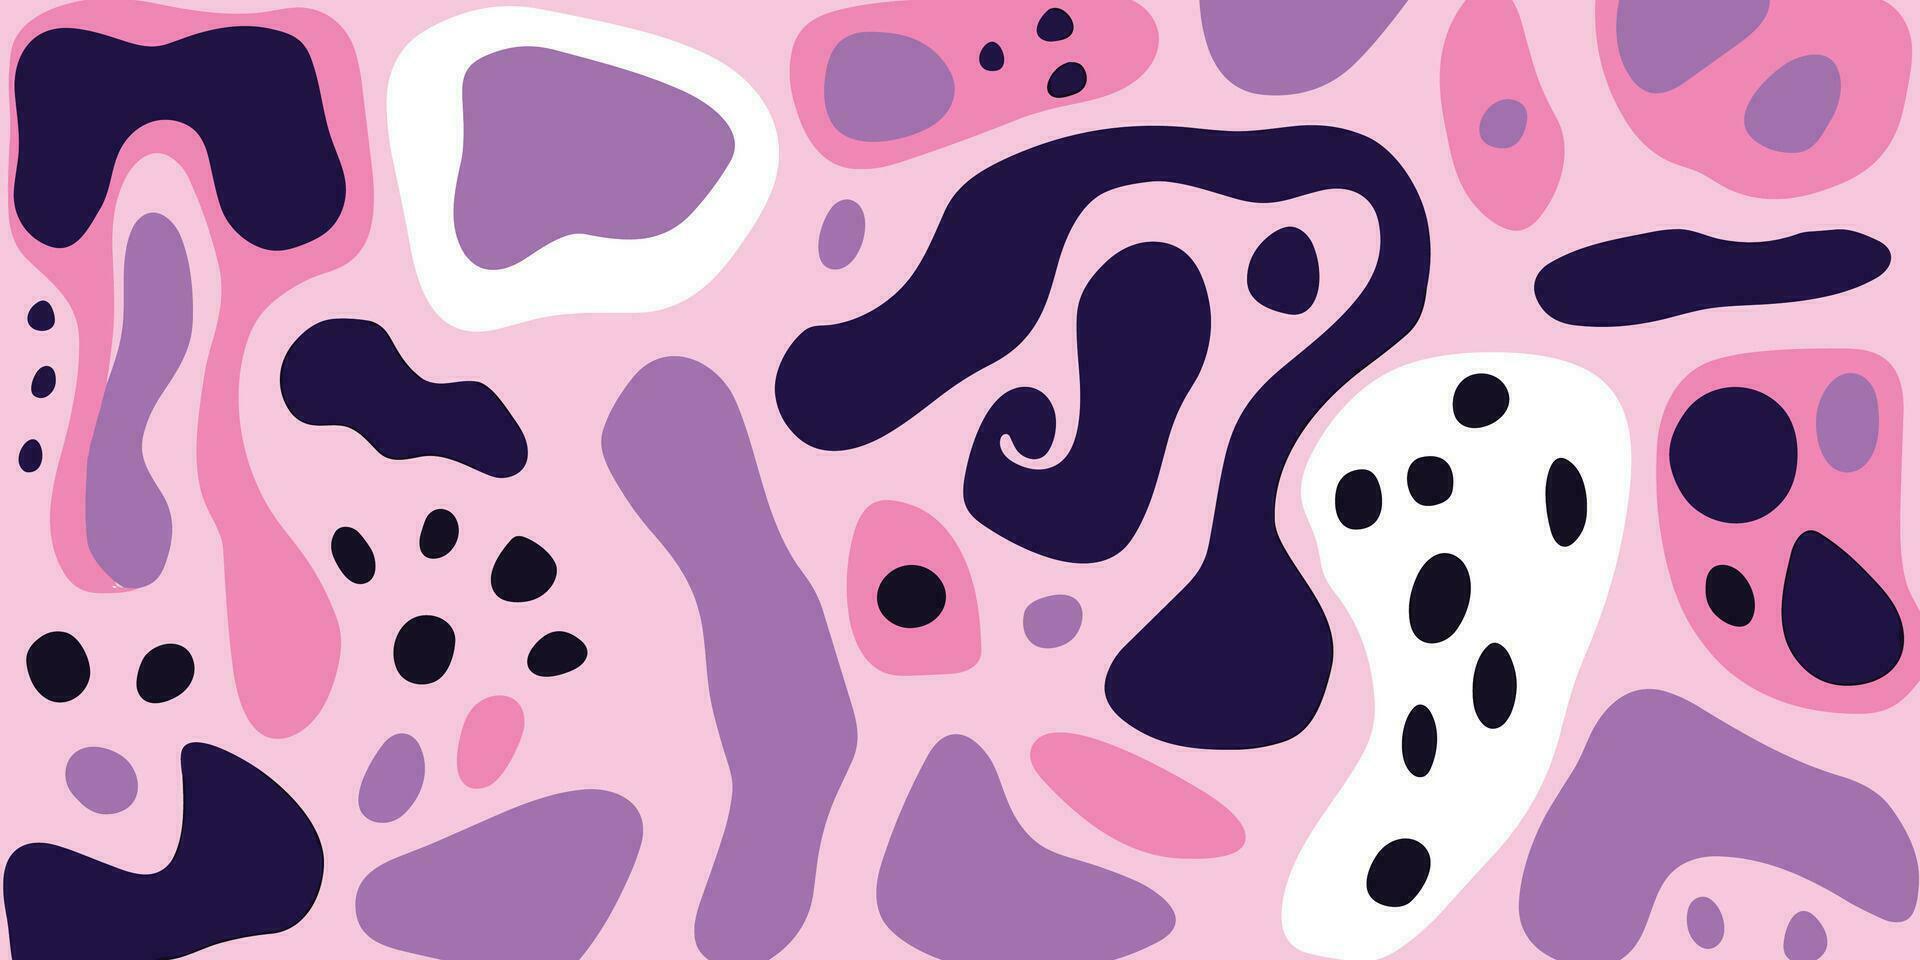 pink and white abstract pattern with a few shapes, in the style of absurd doodle, light violet, minimalist cartooning, loose gestures, organic minimalism, colorful graffiti-style, elongated forms vector